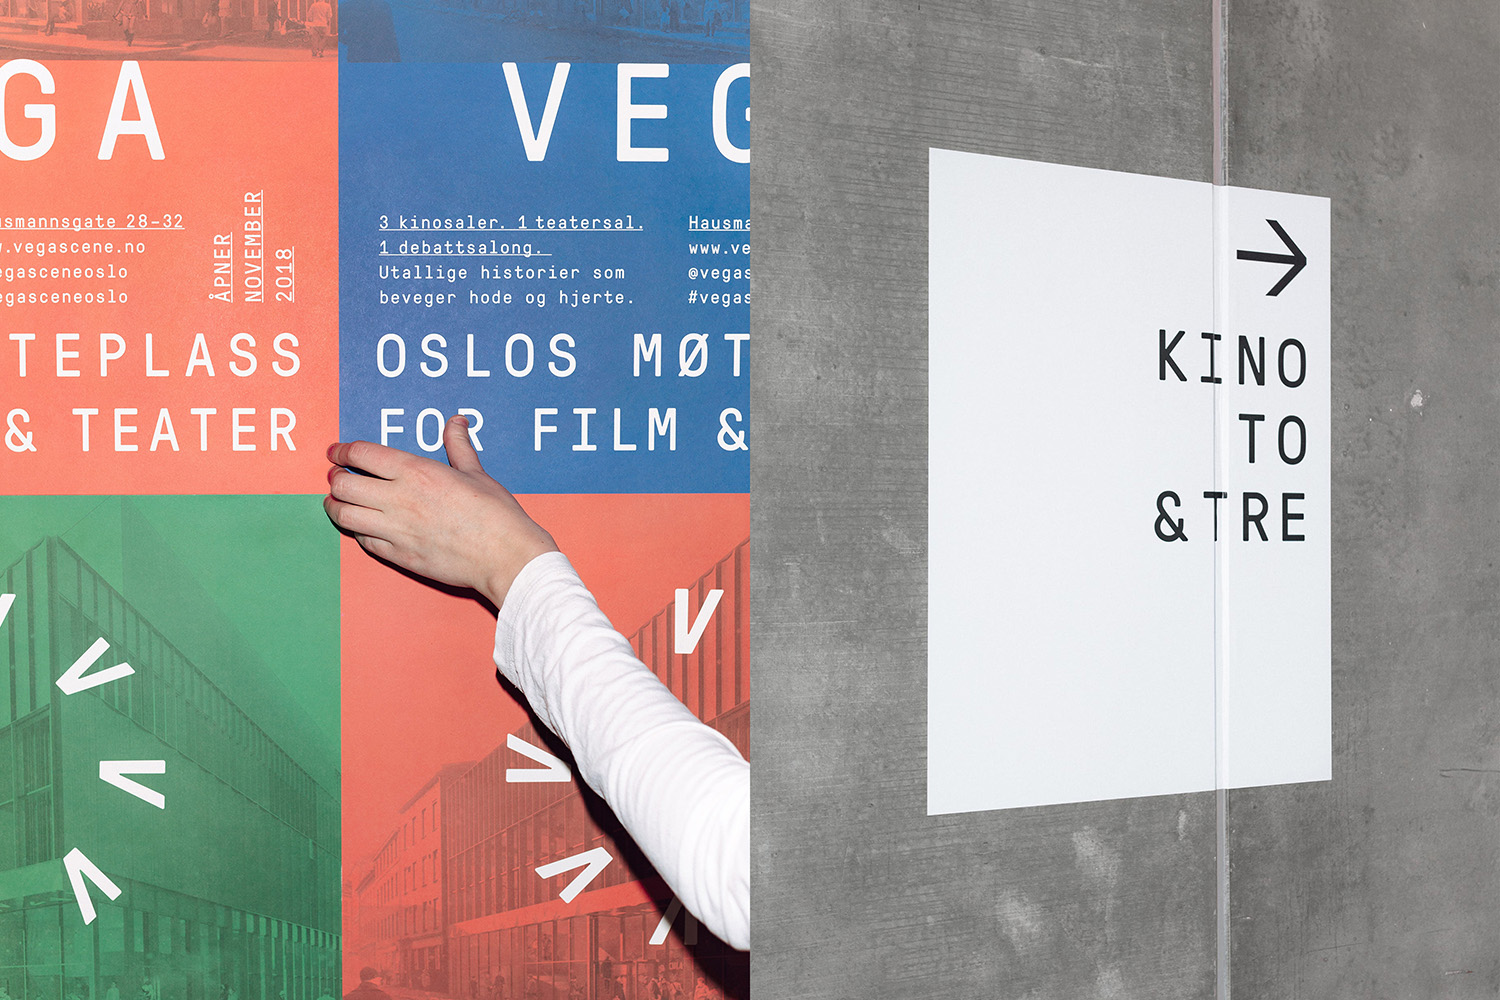 Logo, icons, signage, wayfinding, posters and website design by Metric for Oslo-based cultural venue Vega Scene